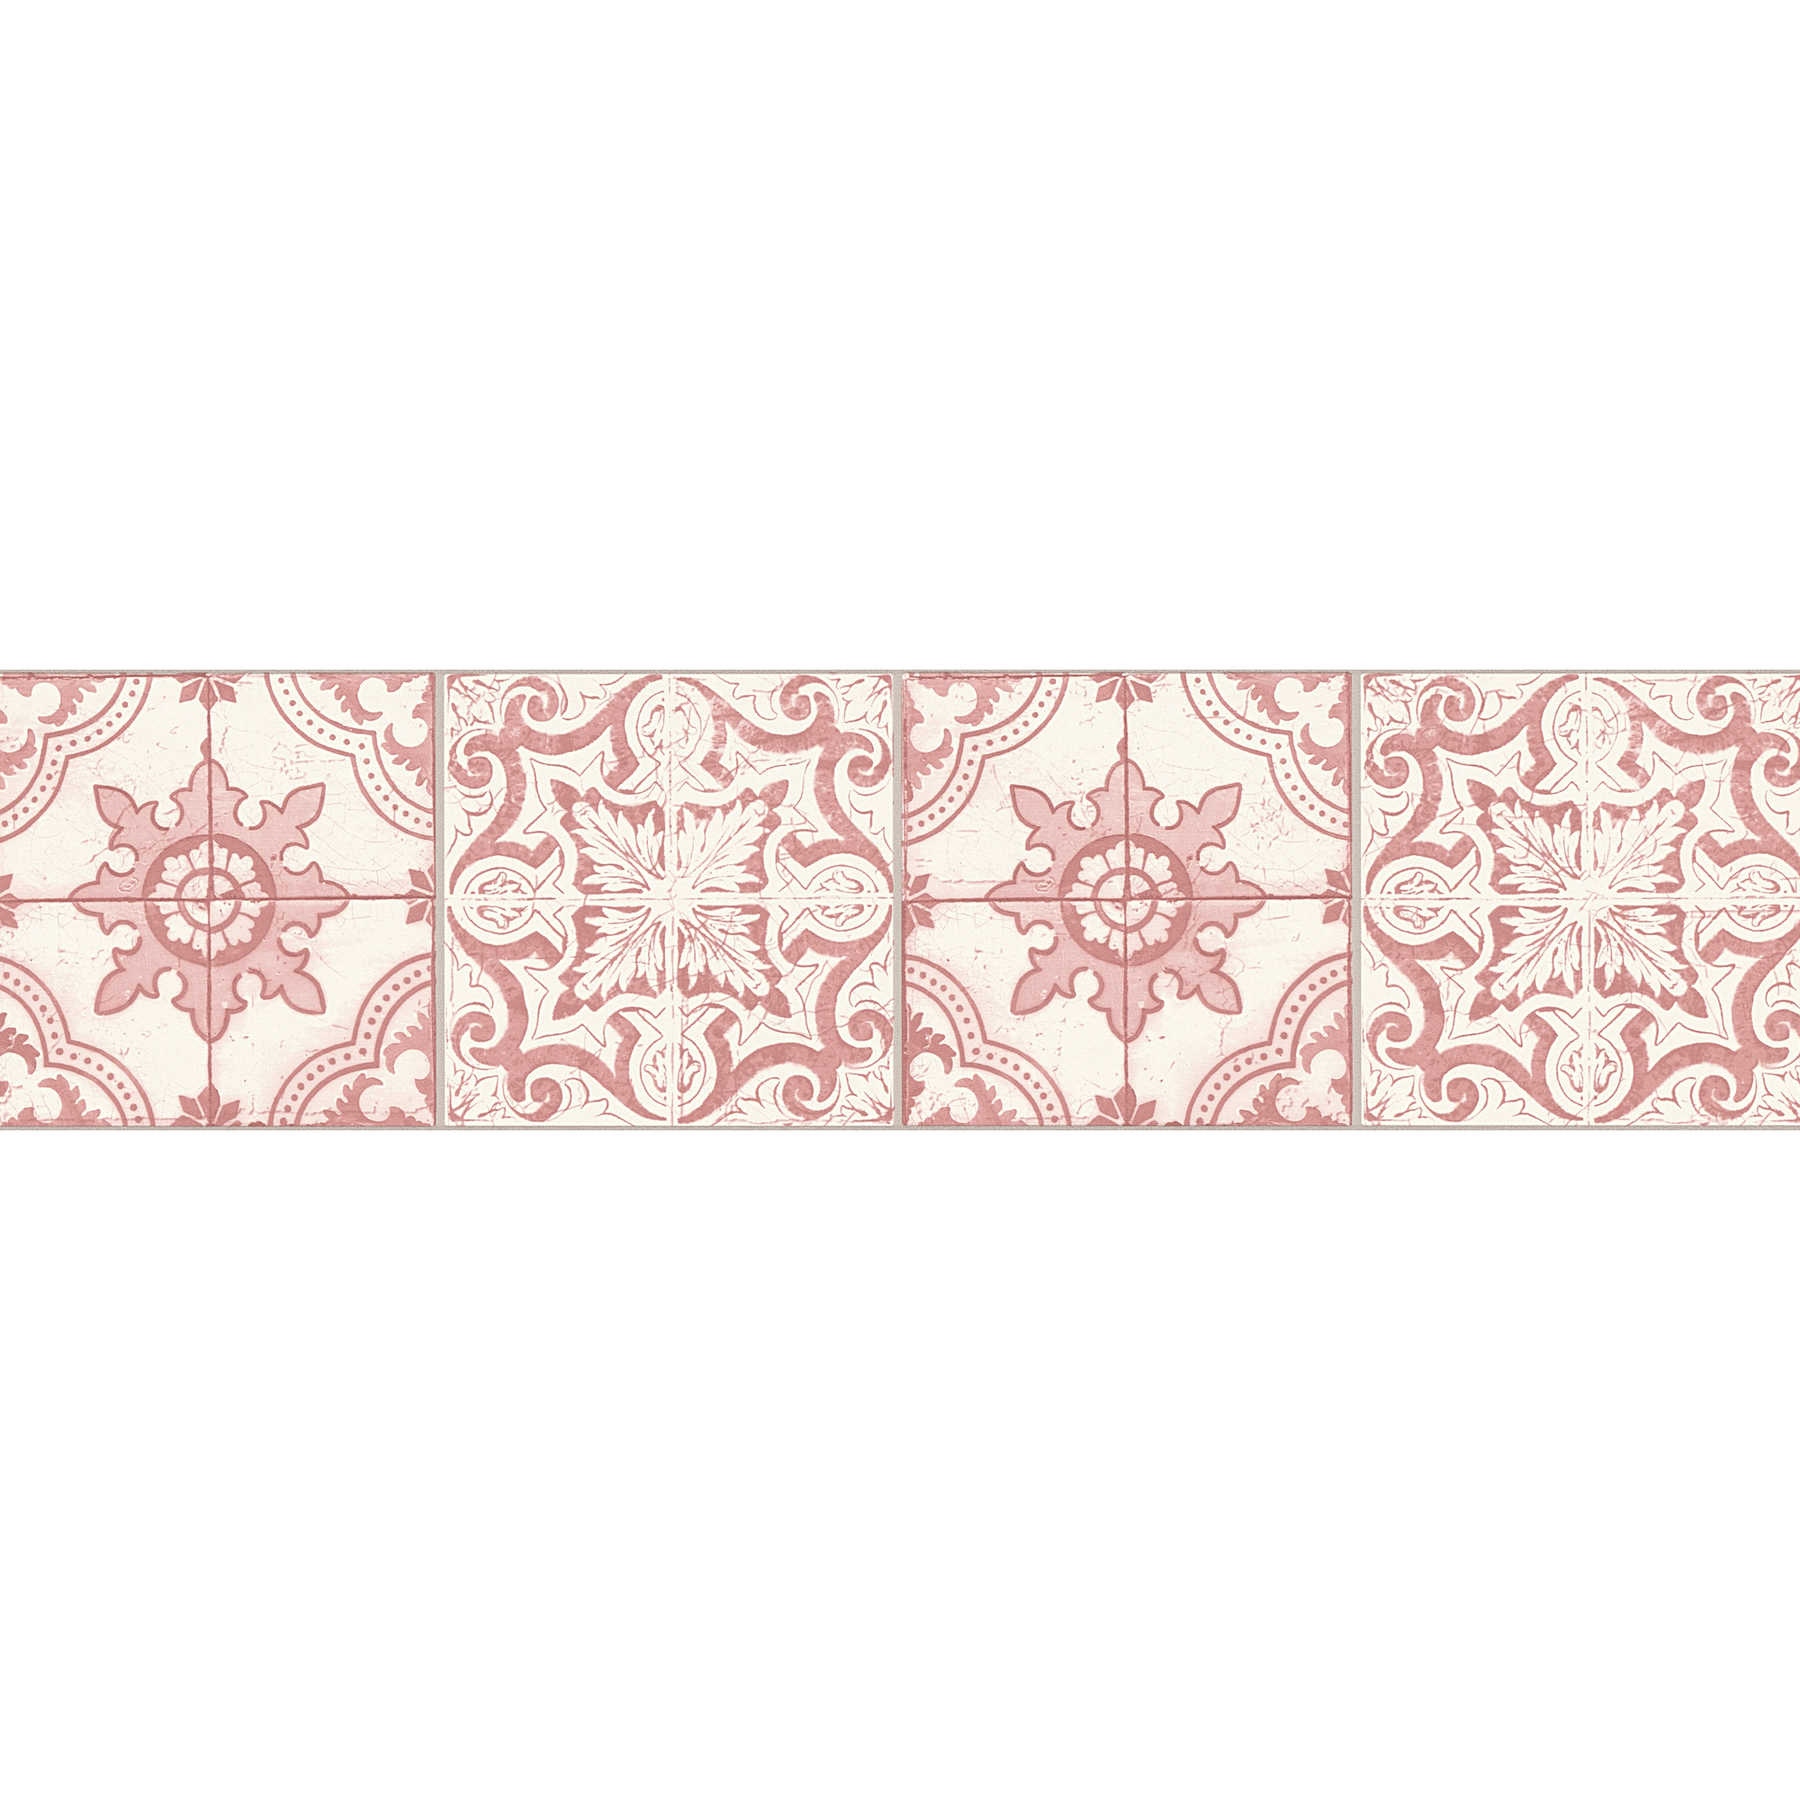         Tile look wallpaper border in vintag style - red, white
    